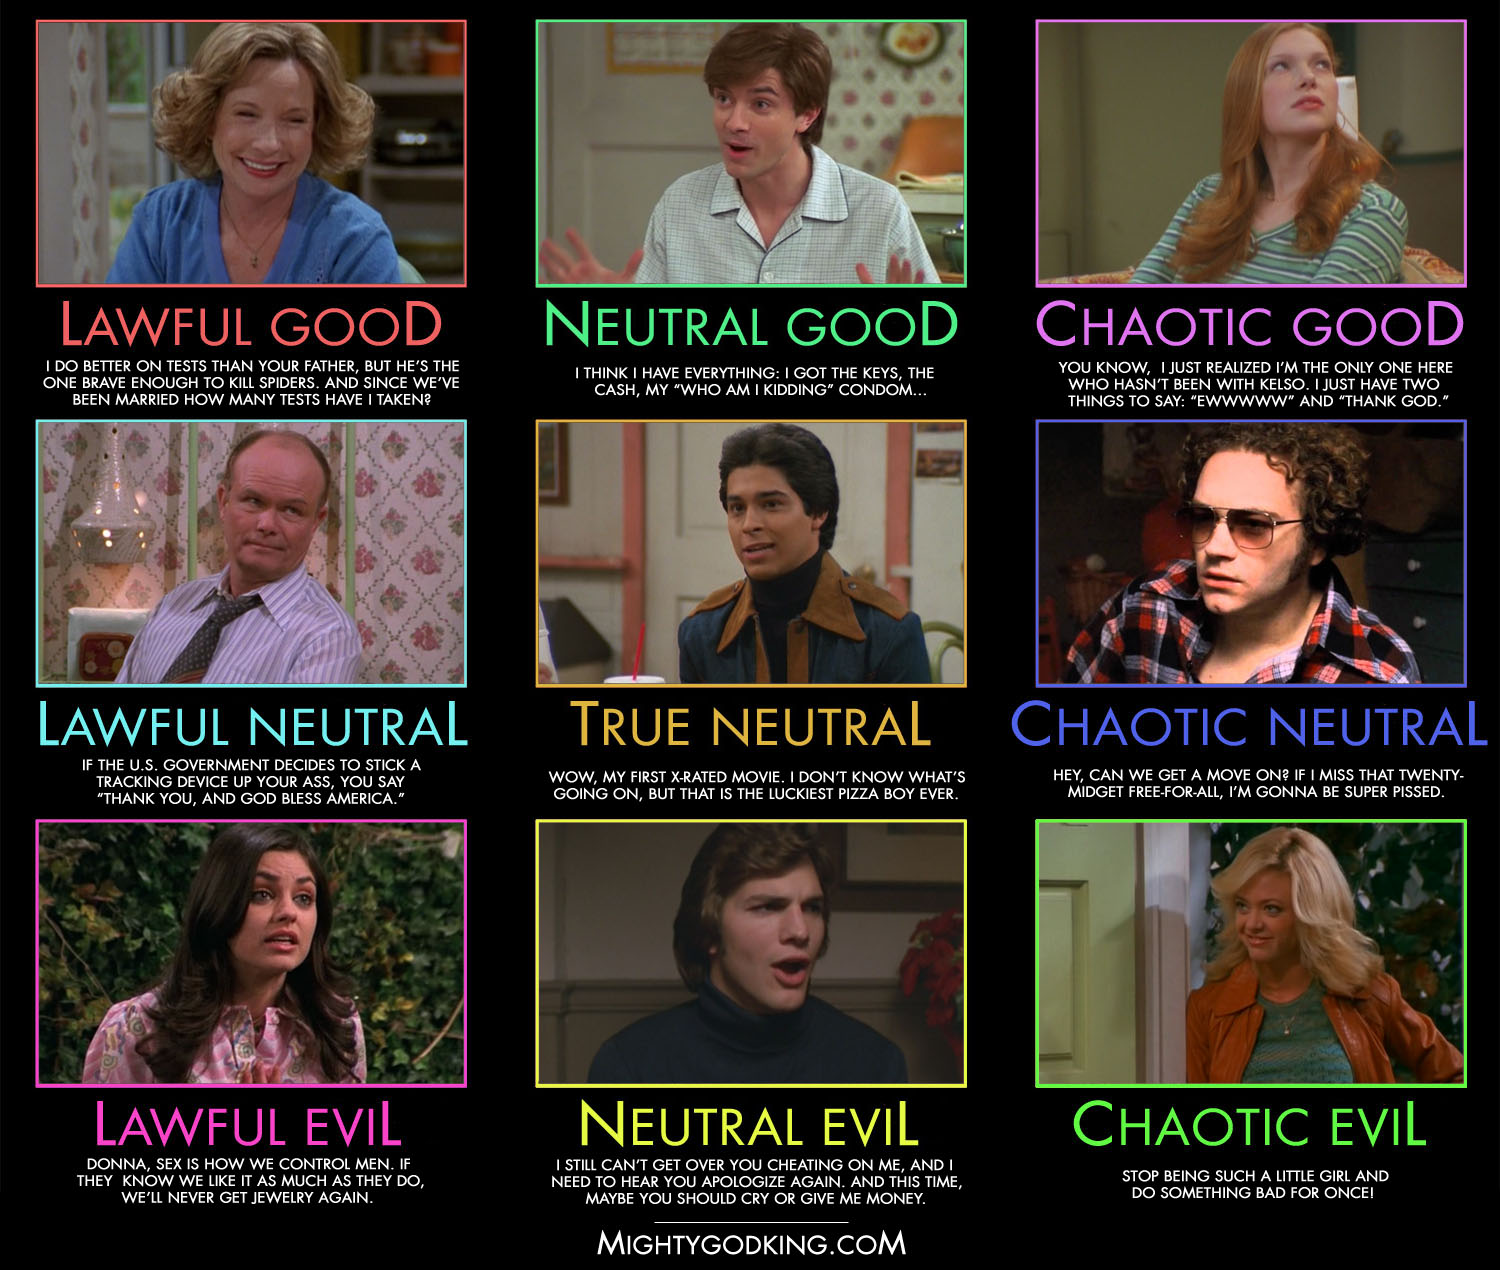 Mightygodking dot com Â» Post Topic Â» ALIGNMENT CHART! That 70s Show